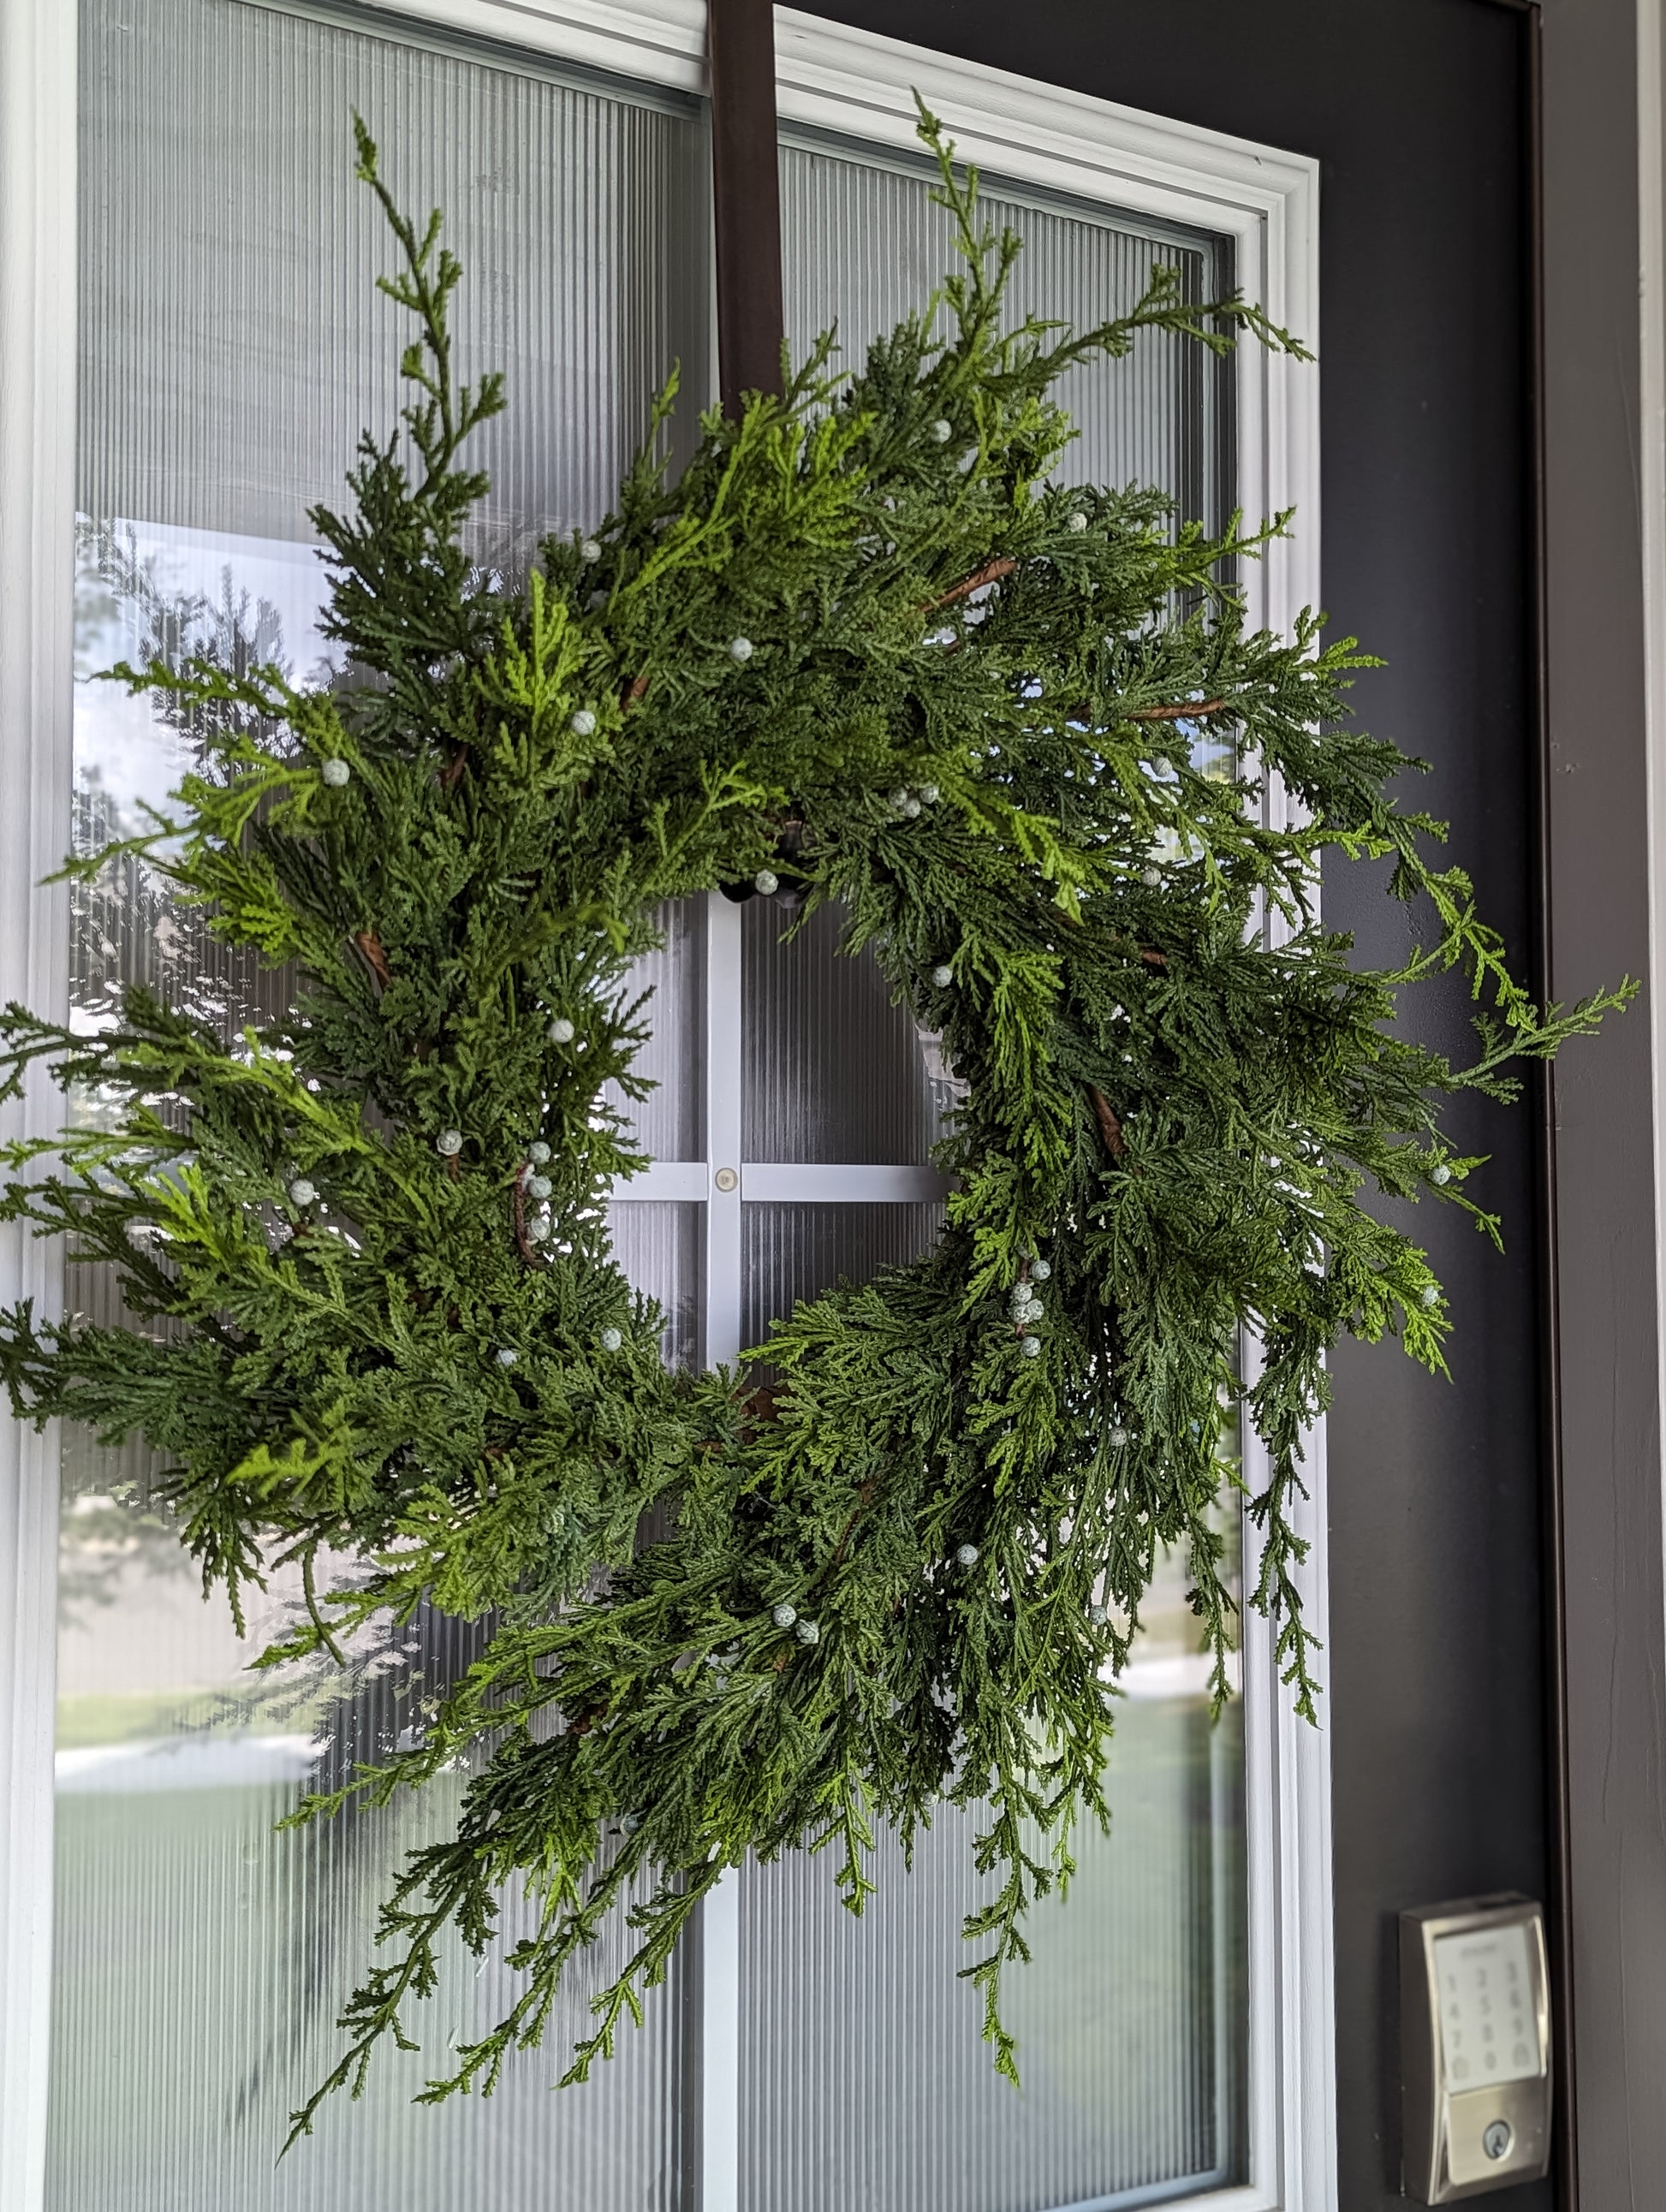 White cypress juniper berry wreath on front door for holiday home decor and front porch decorations.